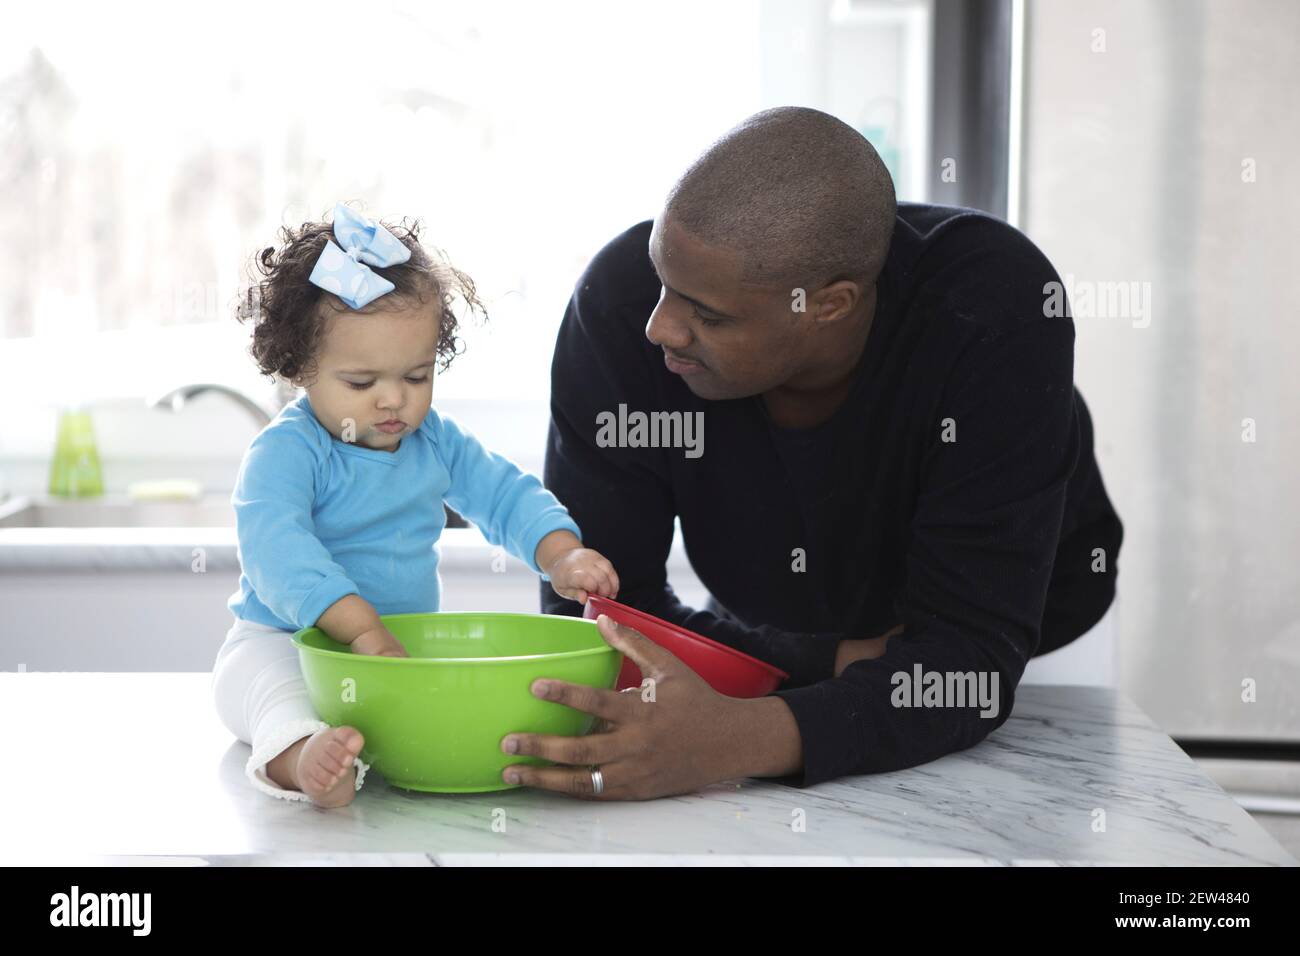 A Dad spends time in the kithchen with his daughter. They are baking, Stock Photo